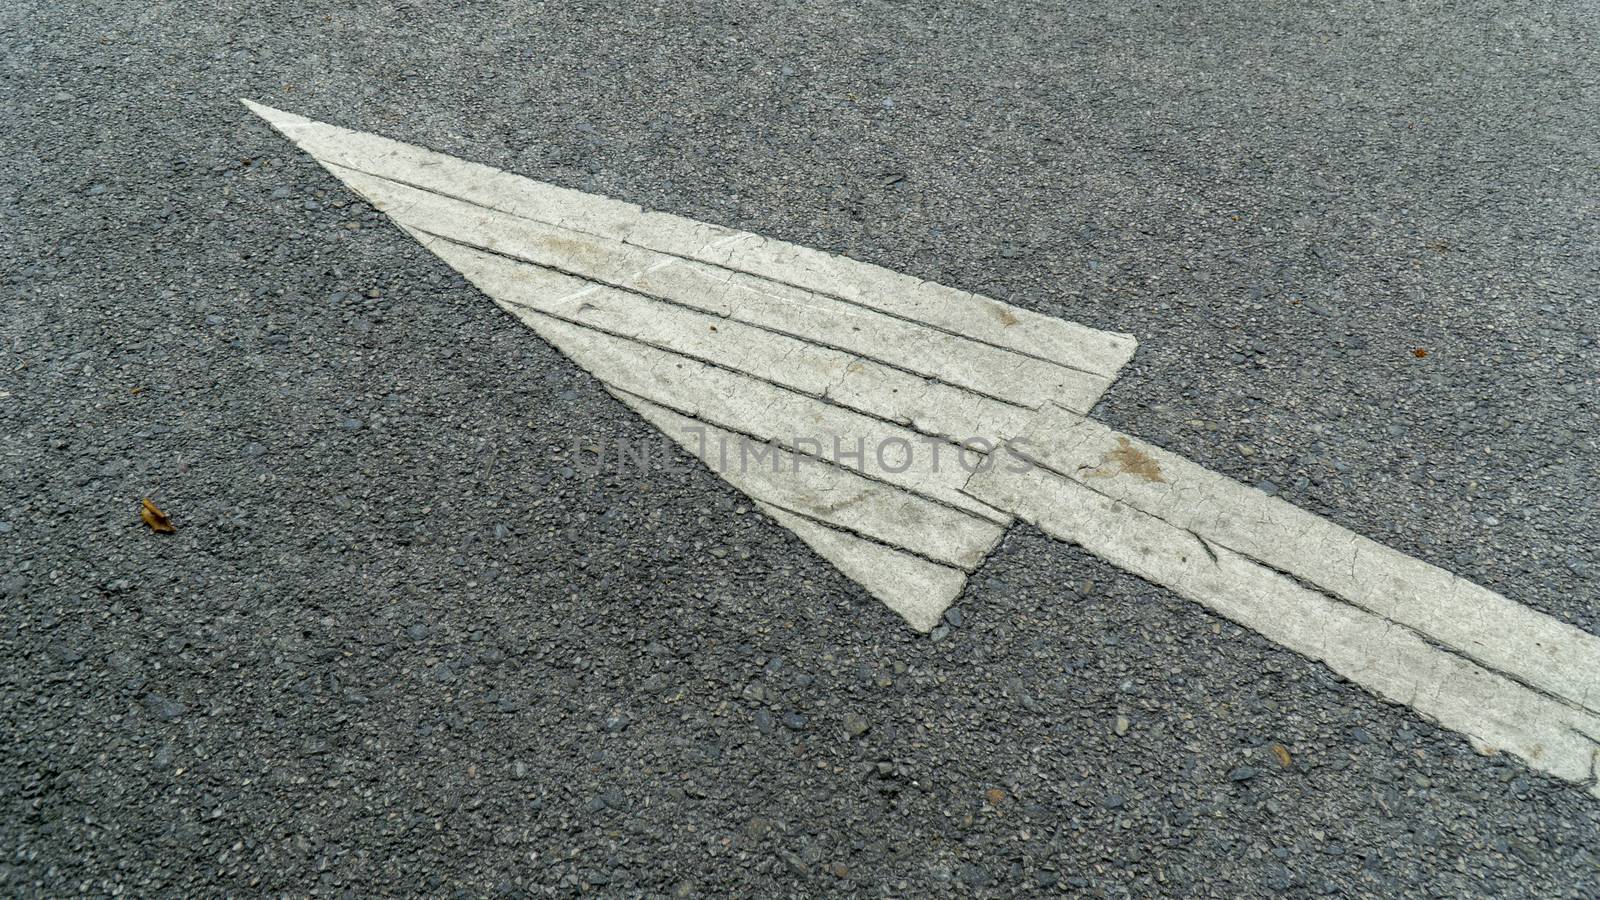 A white arrow painted sign on a gray paved road pointing the direction the car was supposed to drive.